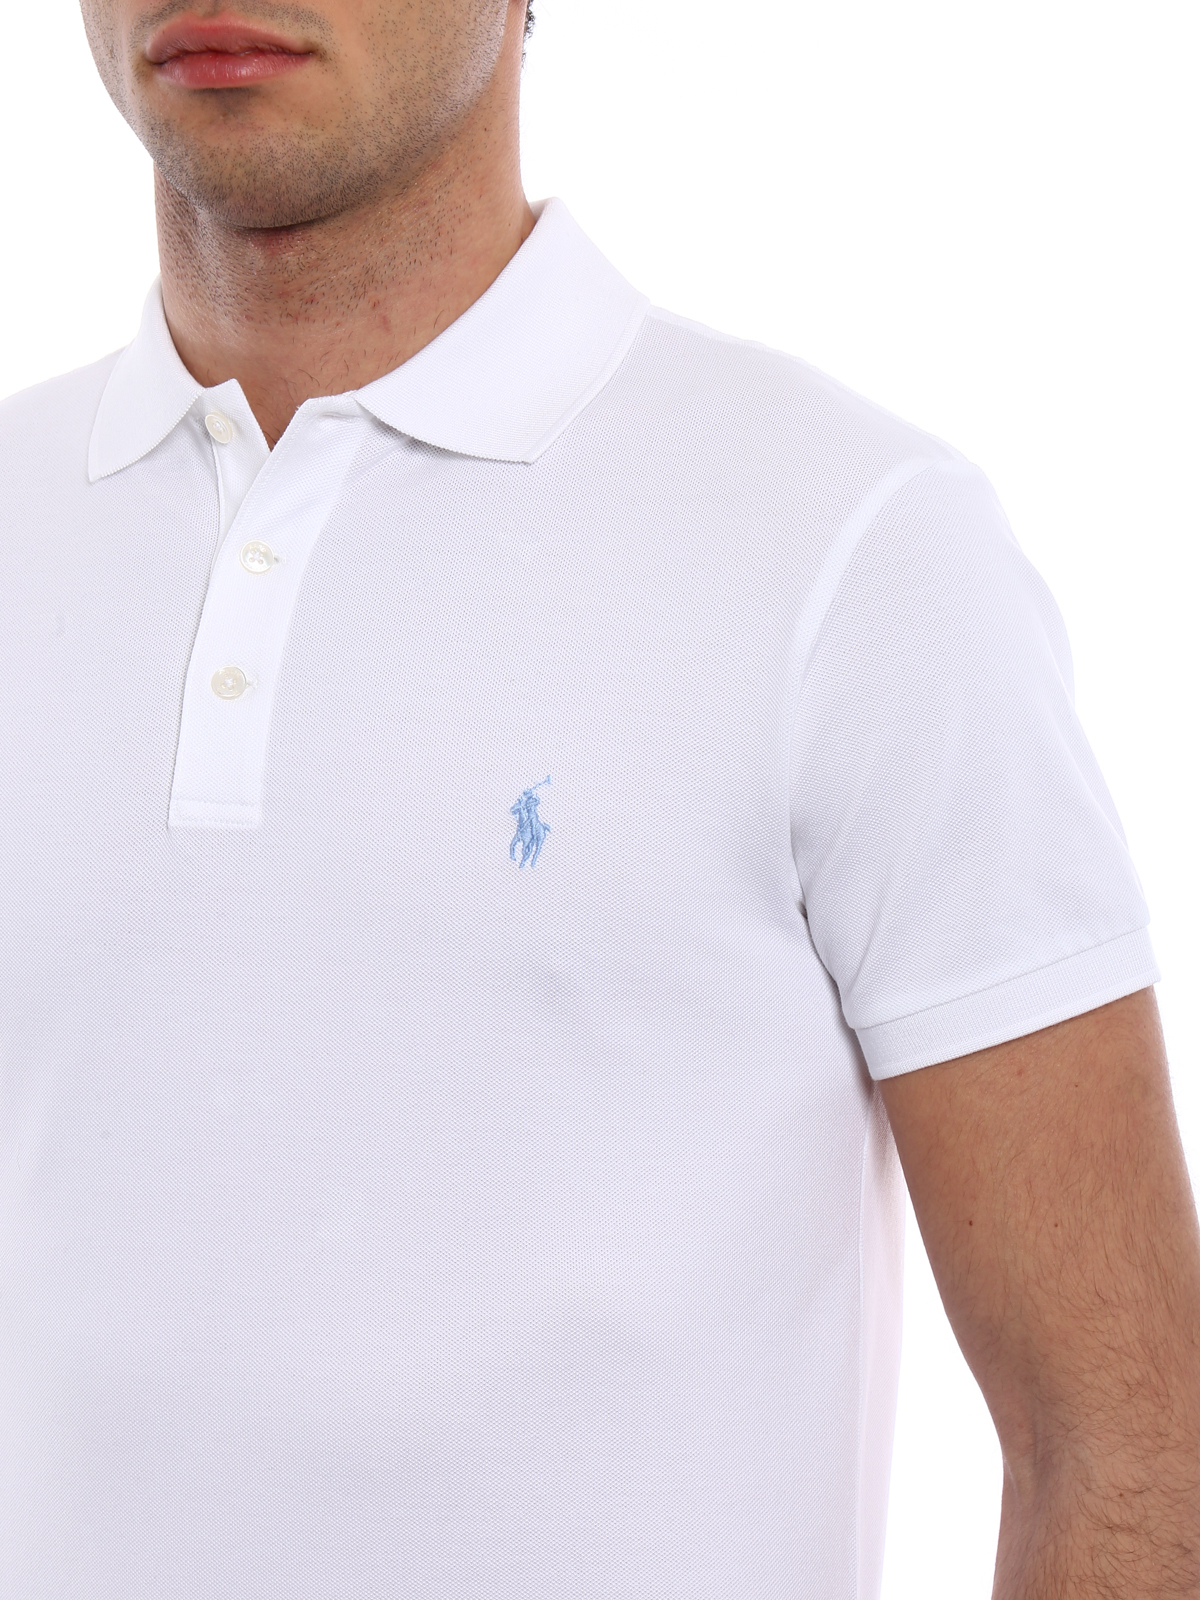 white polo shirt with blue horse